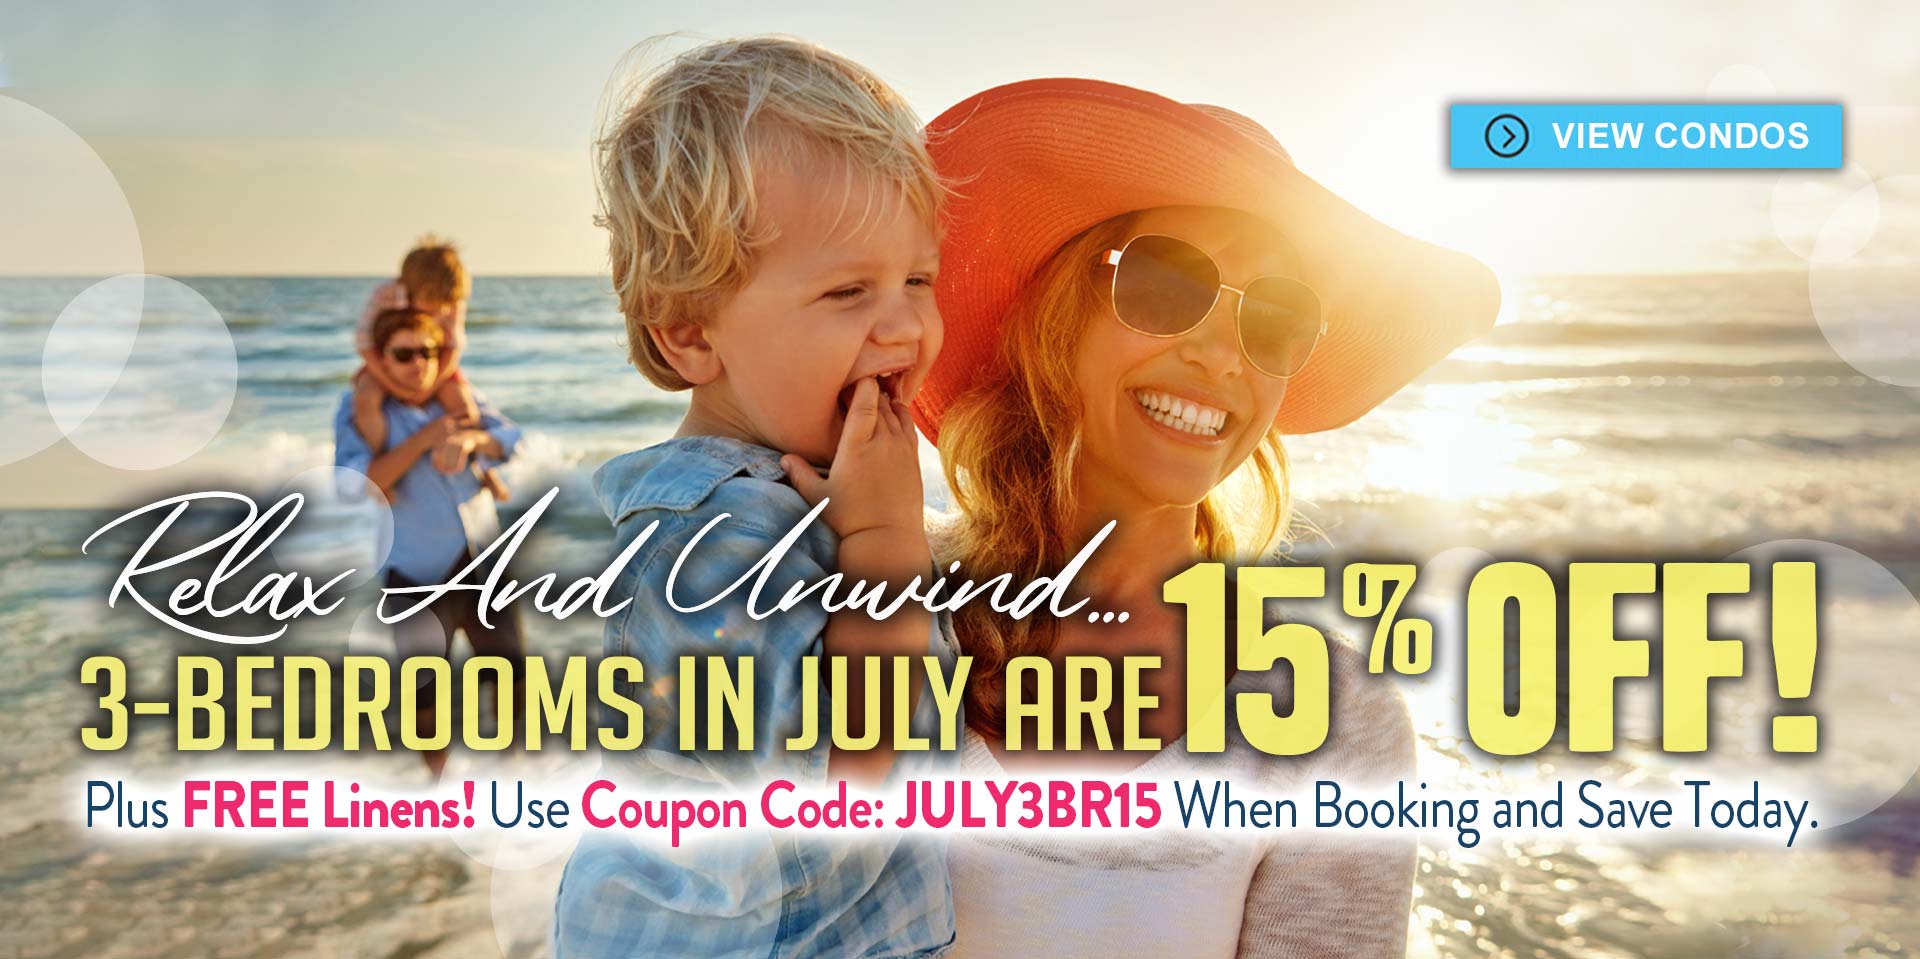 Enjoy 15% off all 3-bedroom units in July! Use Coupon Code: JULY3BR15